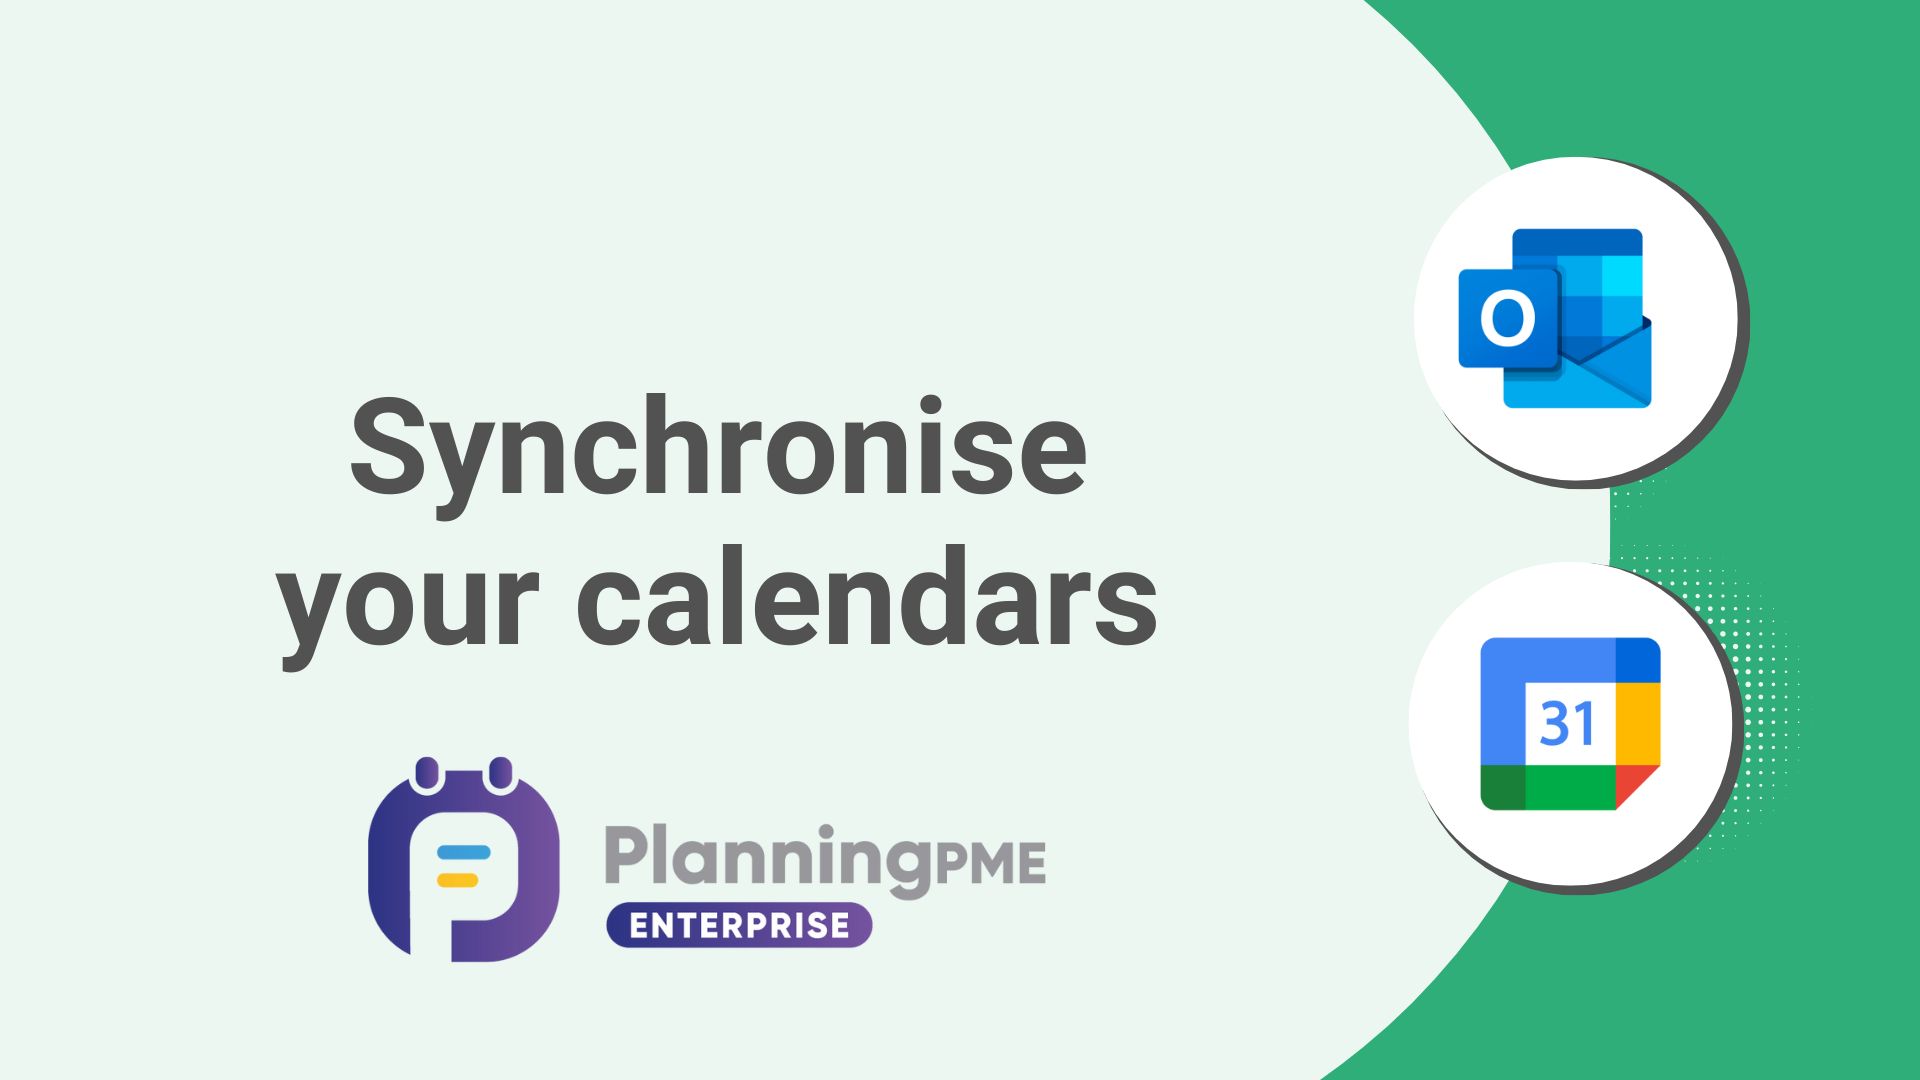 Schedule synchronisation with Outlook or Google Calendar